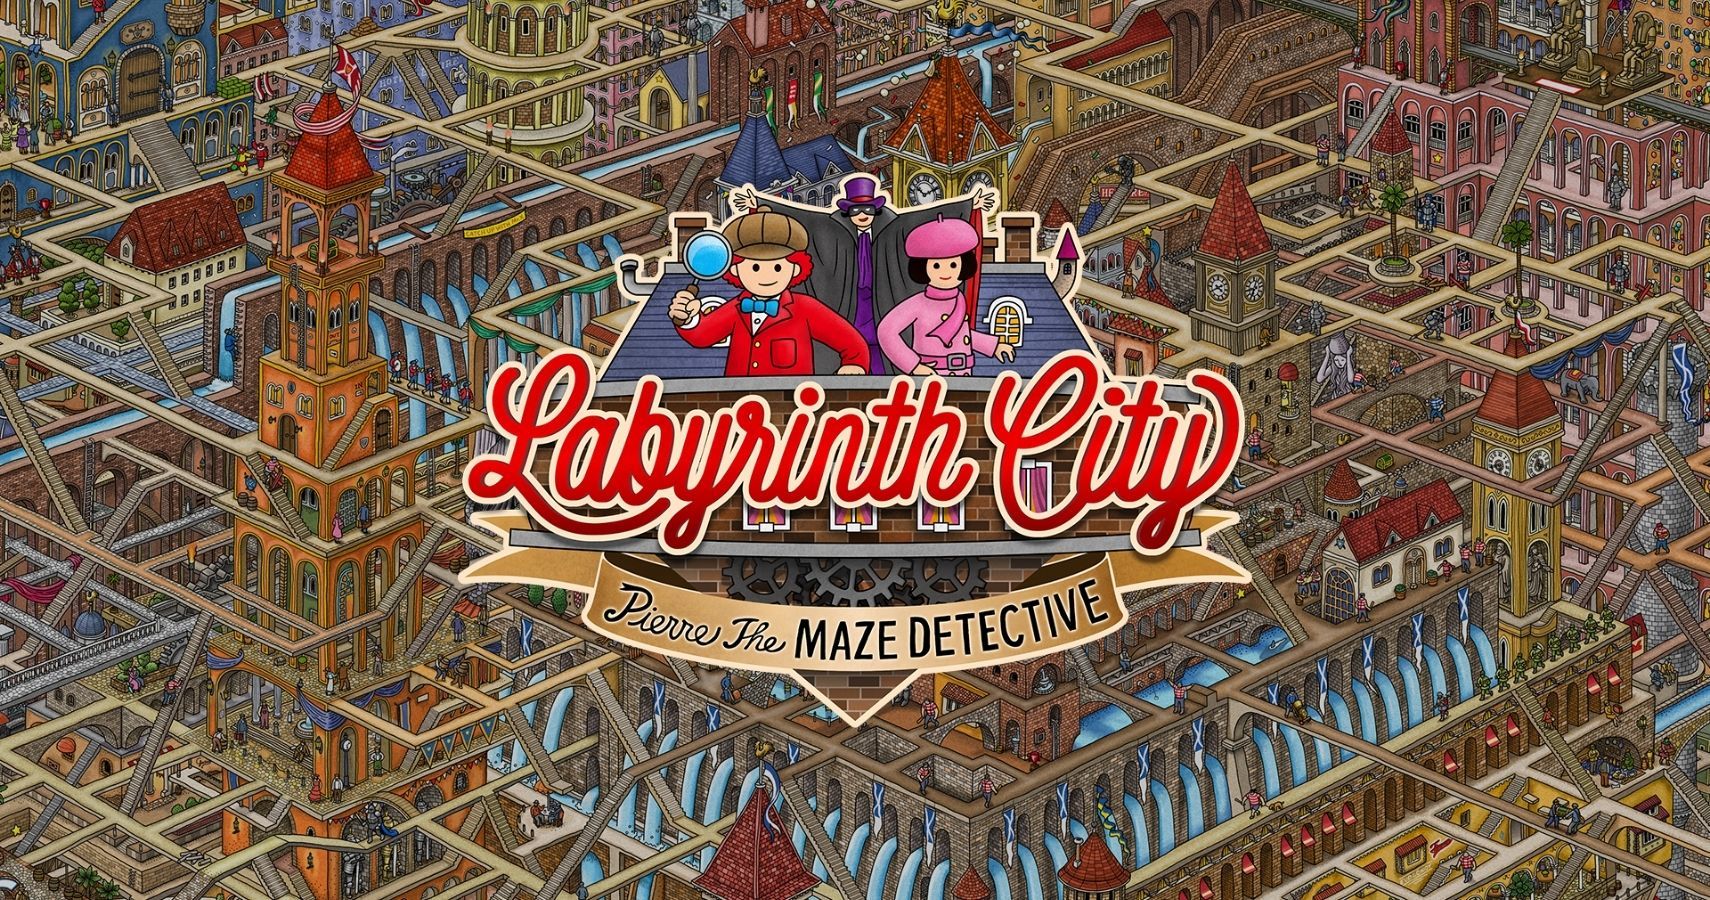 Labyrinth City Pierre the Maze Detective Wins Art Award Launches Free Demo